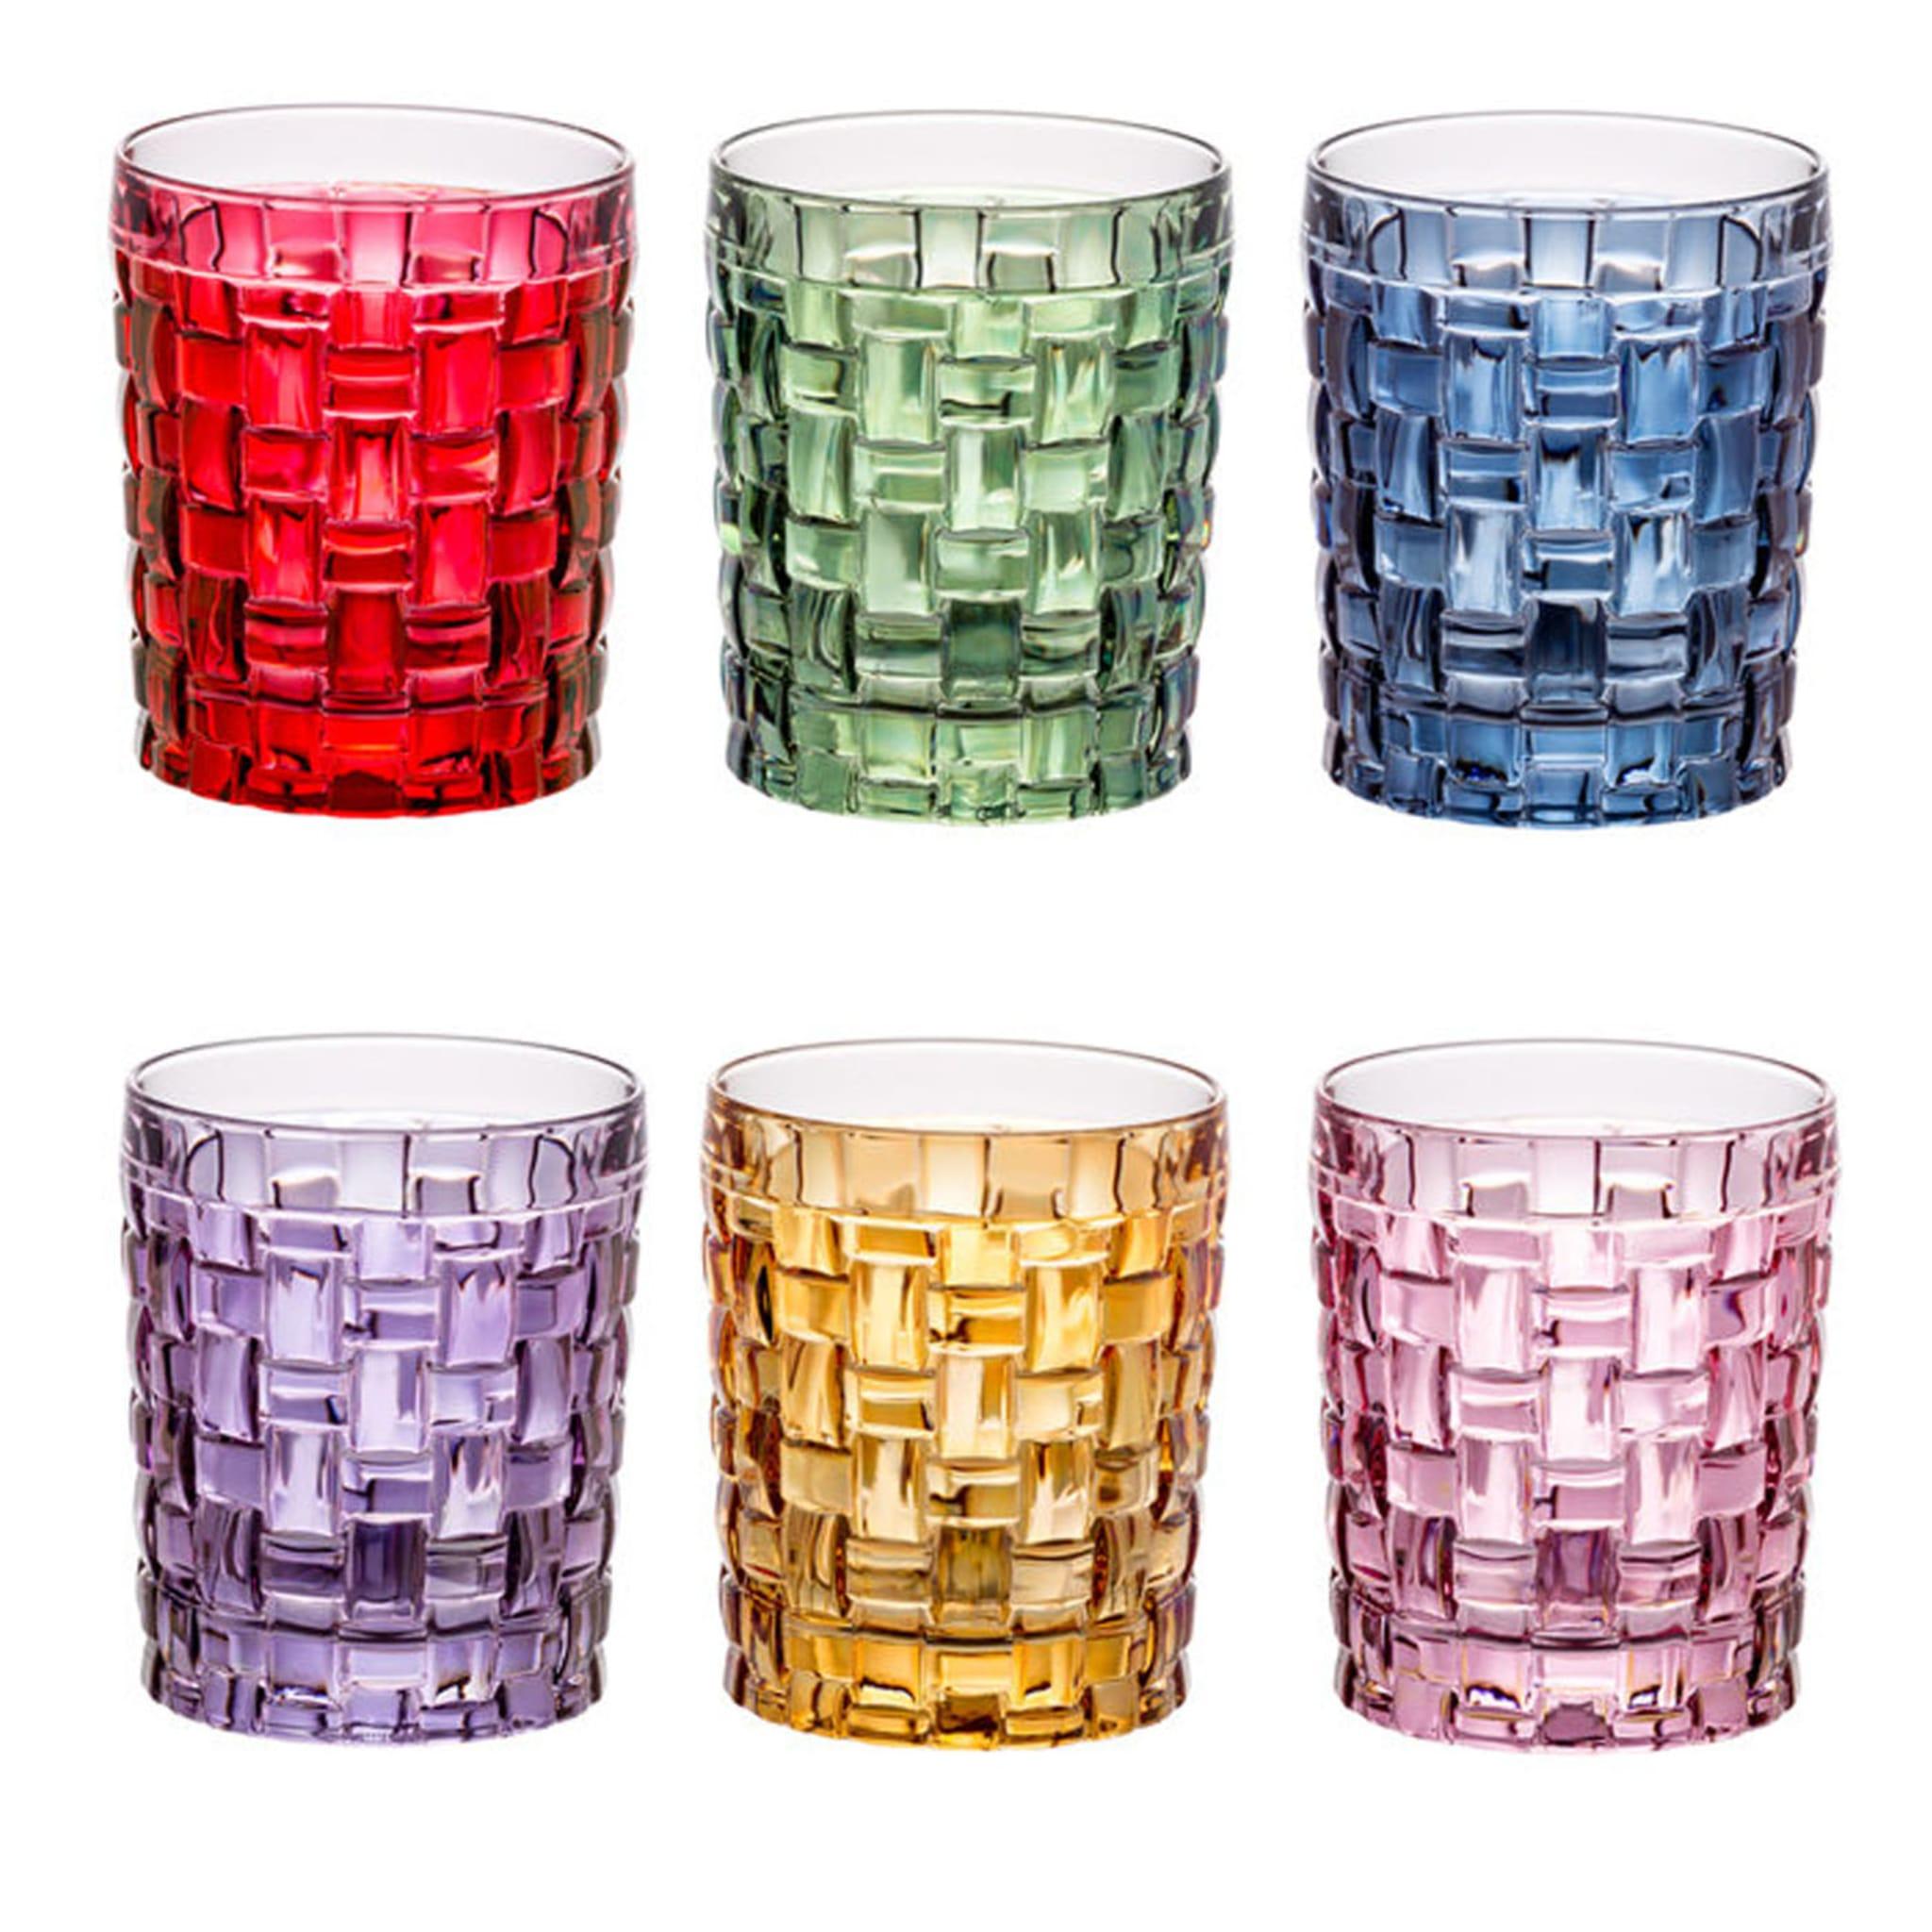 Exquisite craftsmanship, striking texture, and unique color combinations are the alluring qualities of this set of six water glasses of the Manhattan Collection. The linear silhouette of the pieces in glass is hand decorated by hand with a superb